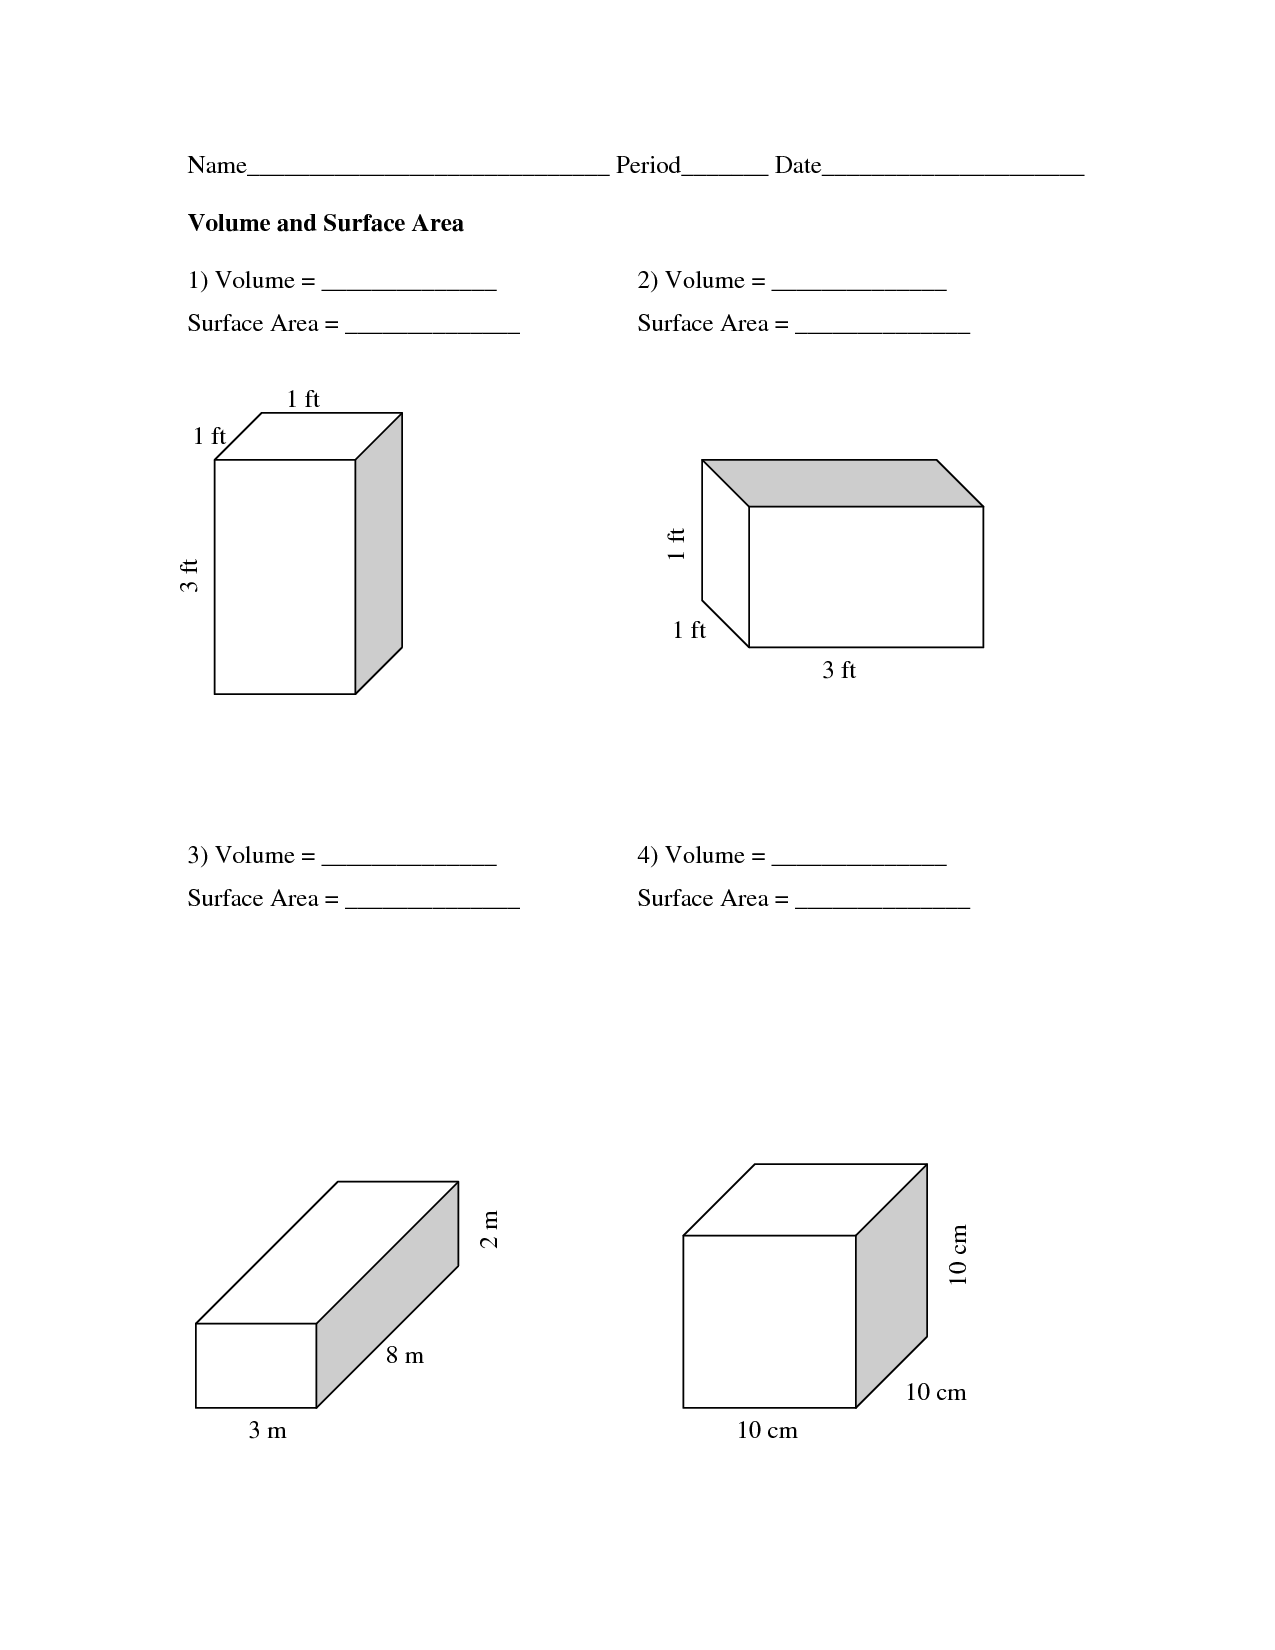 volume-and-surface-area-of-rectangular-prism-worksheet